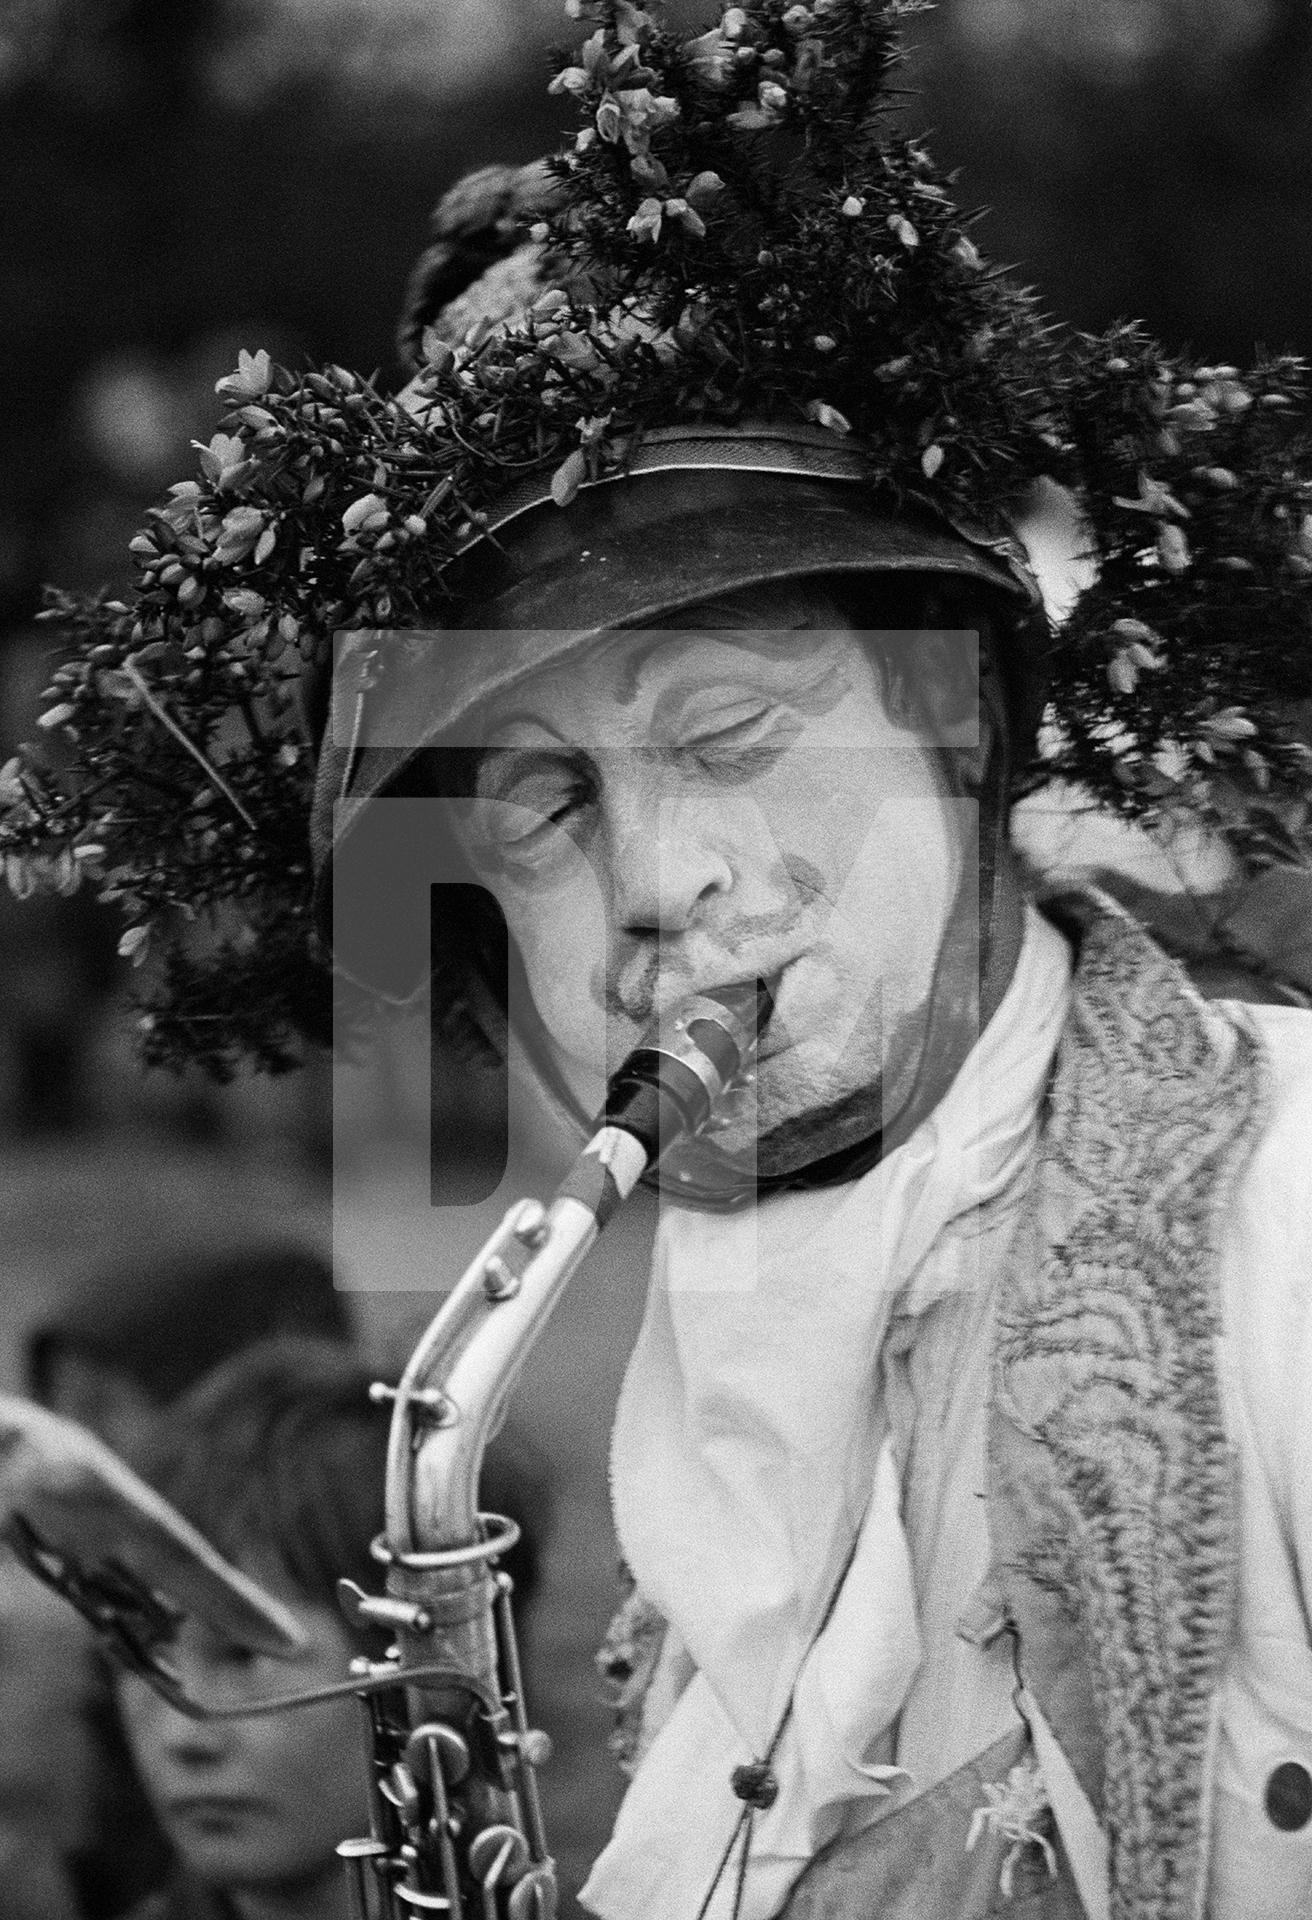 Performer John Fox playing saxophone. Mayday celebration, Burnley and Barrowford along the Leeds-Liverpool canal. 1 May 1976 by Daniel Meadows